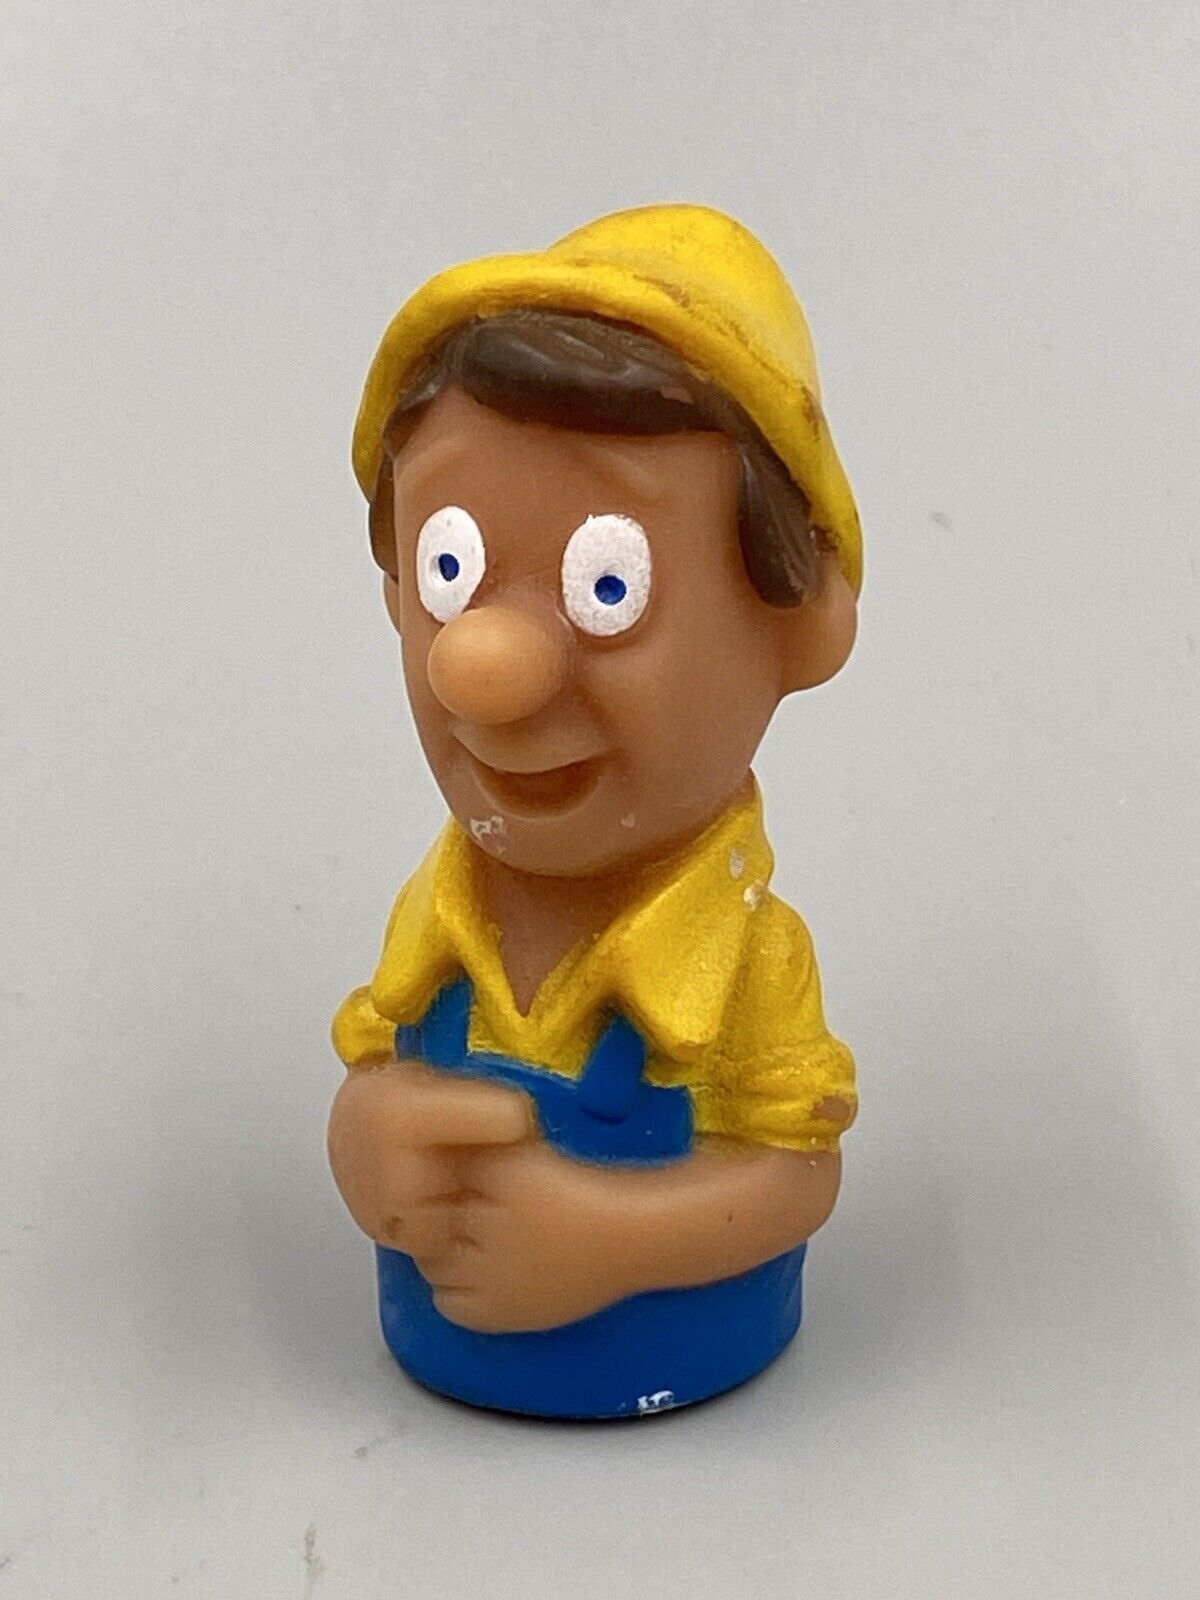 Vintage Pinocchio Rubber Bust Finger Puppet Made in Hong Kong 2.25”